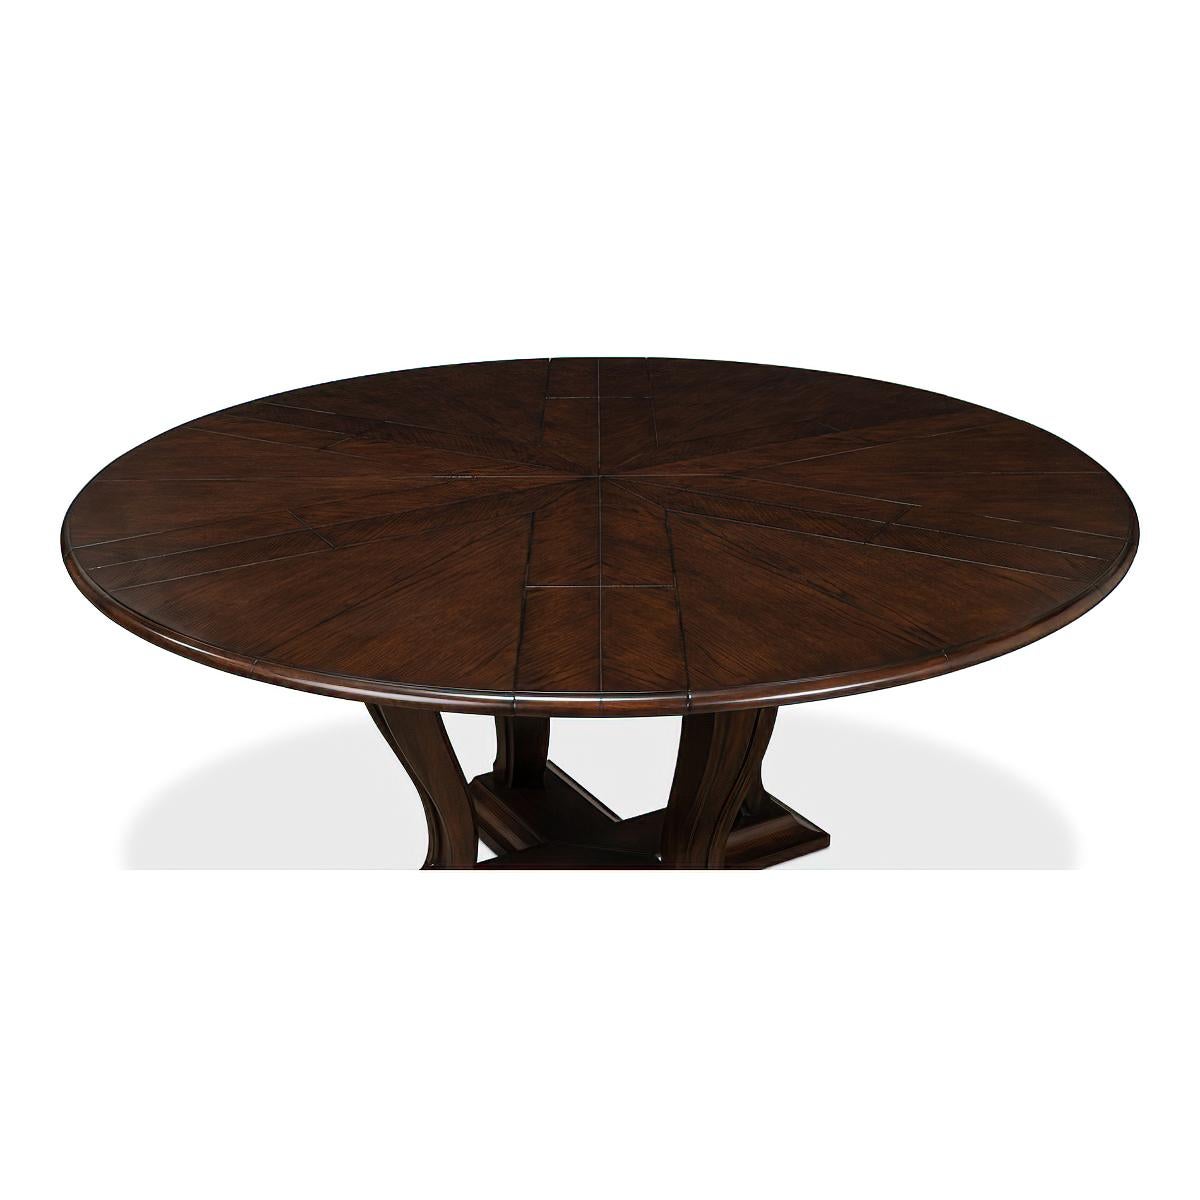 Asian Art Deco Style Dining Table For Sale